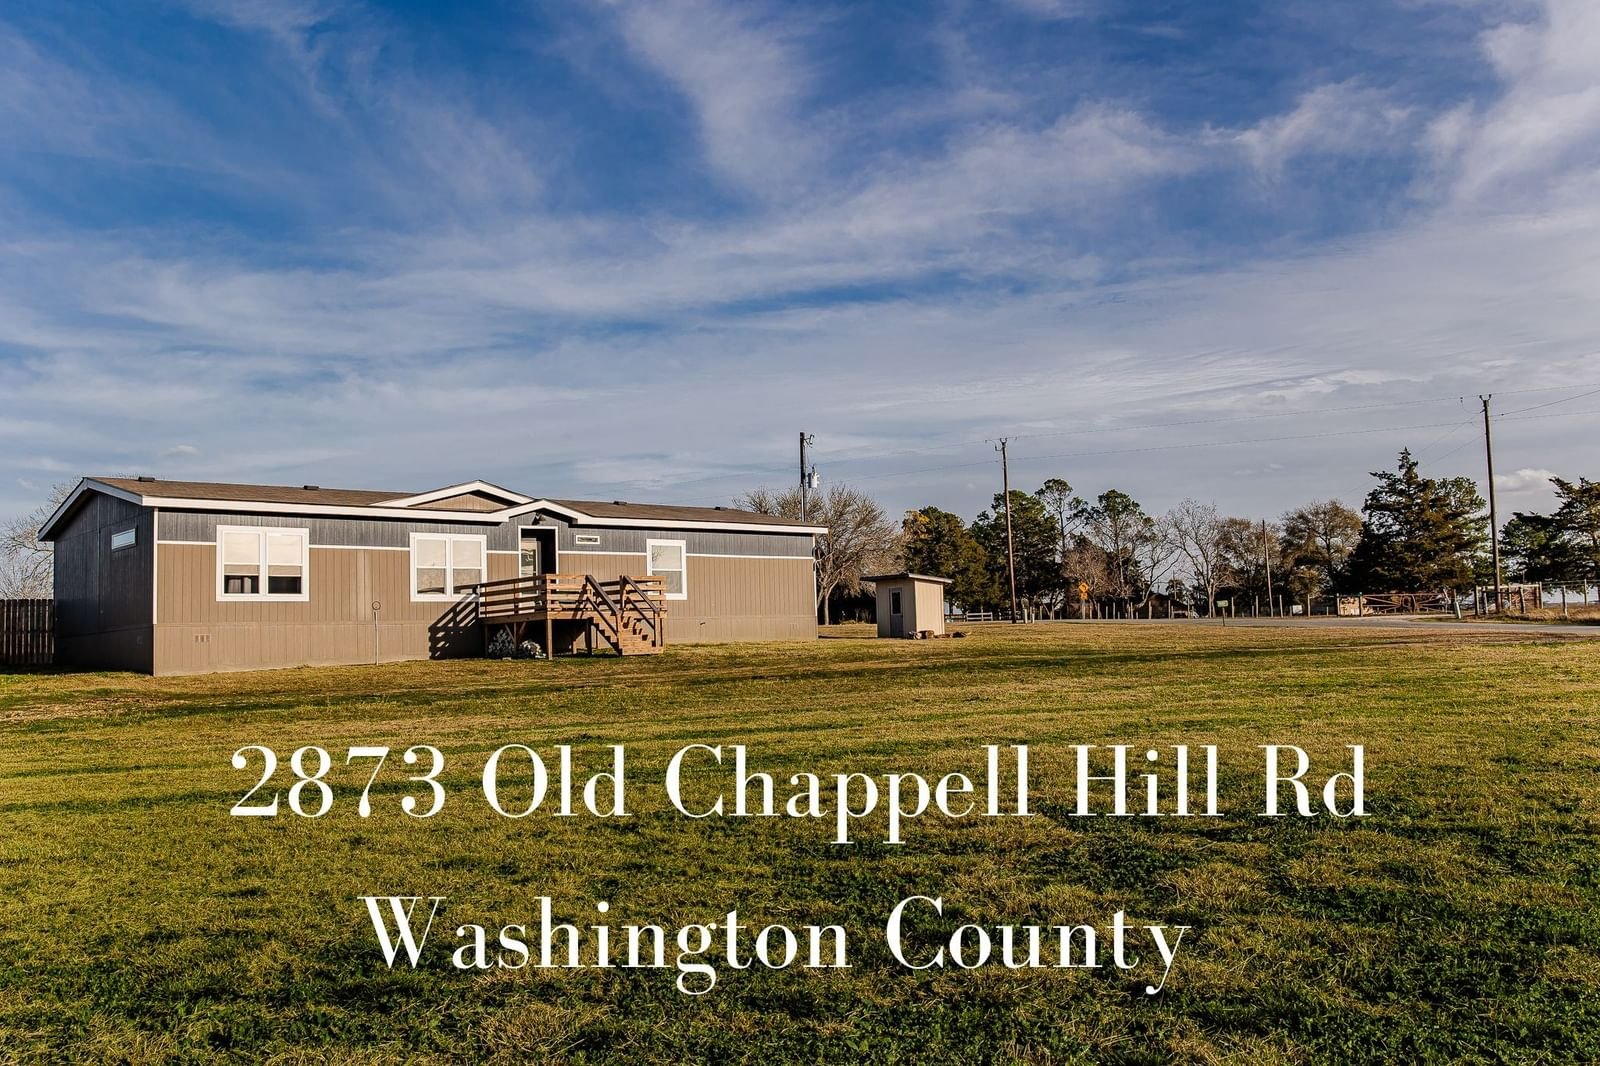 Real estate property located at 2873 Old Chappell Hill, Washington, A0106 - A0106 - Walker, James, Brenham, TX, US